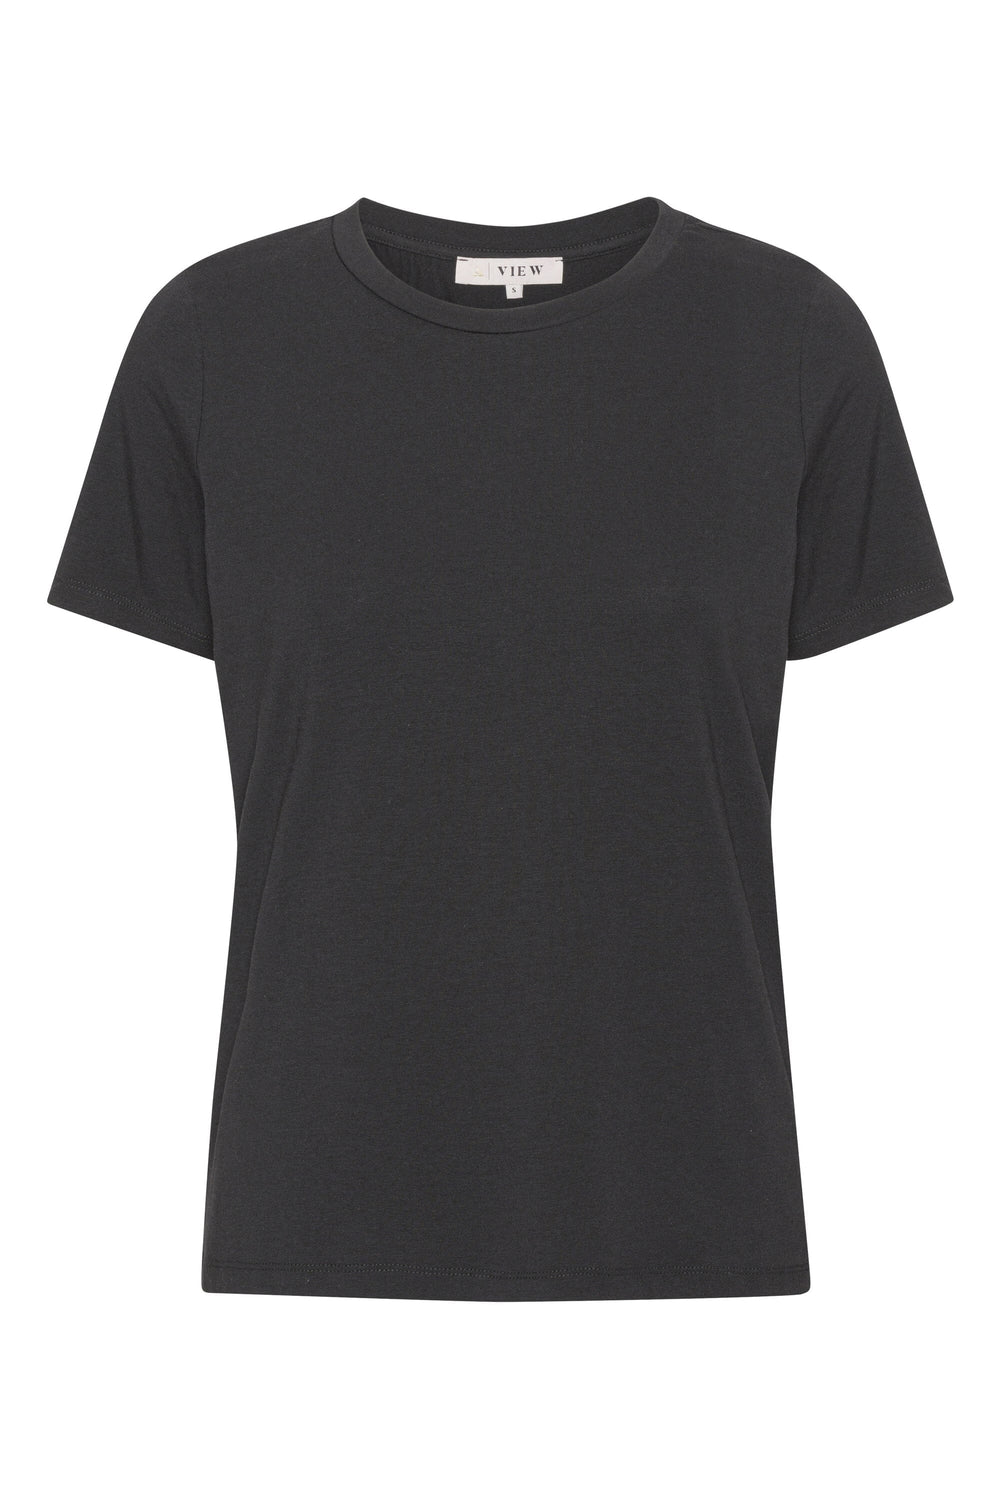 A-VIEW - Stabil Top S/S - 999 Black T-shirts 